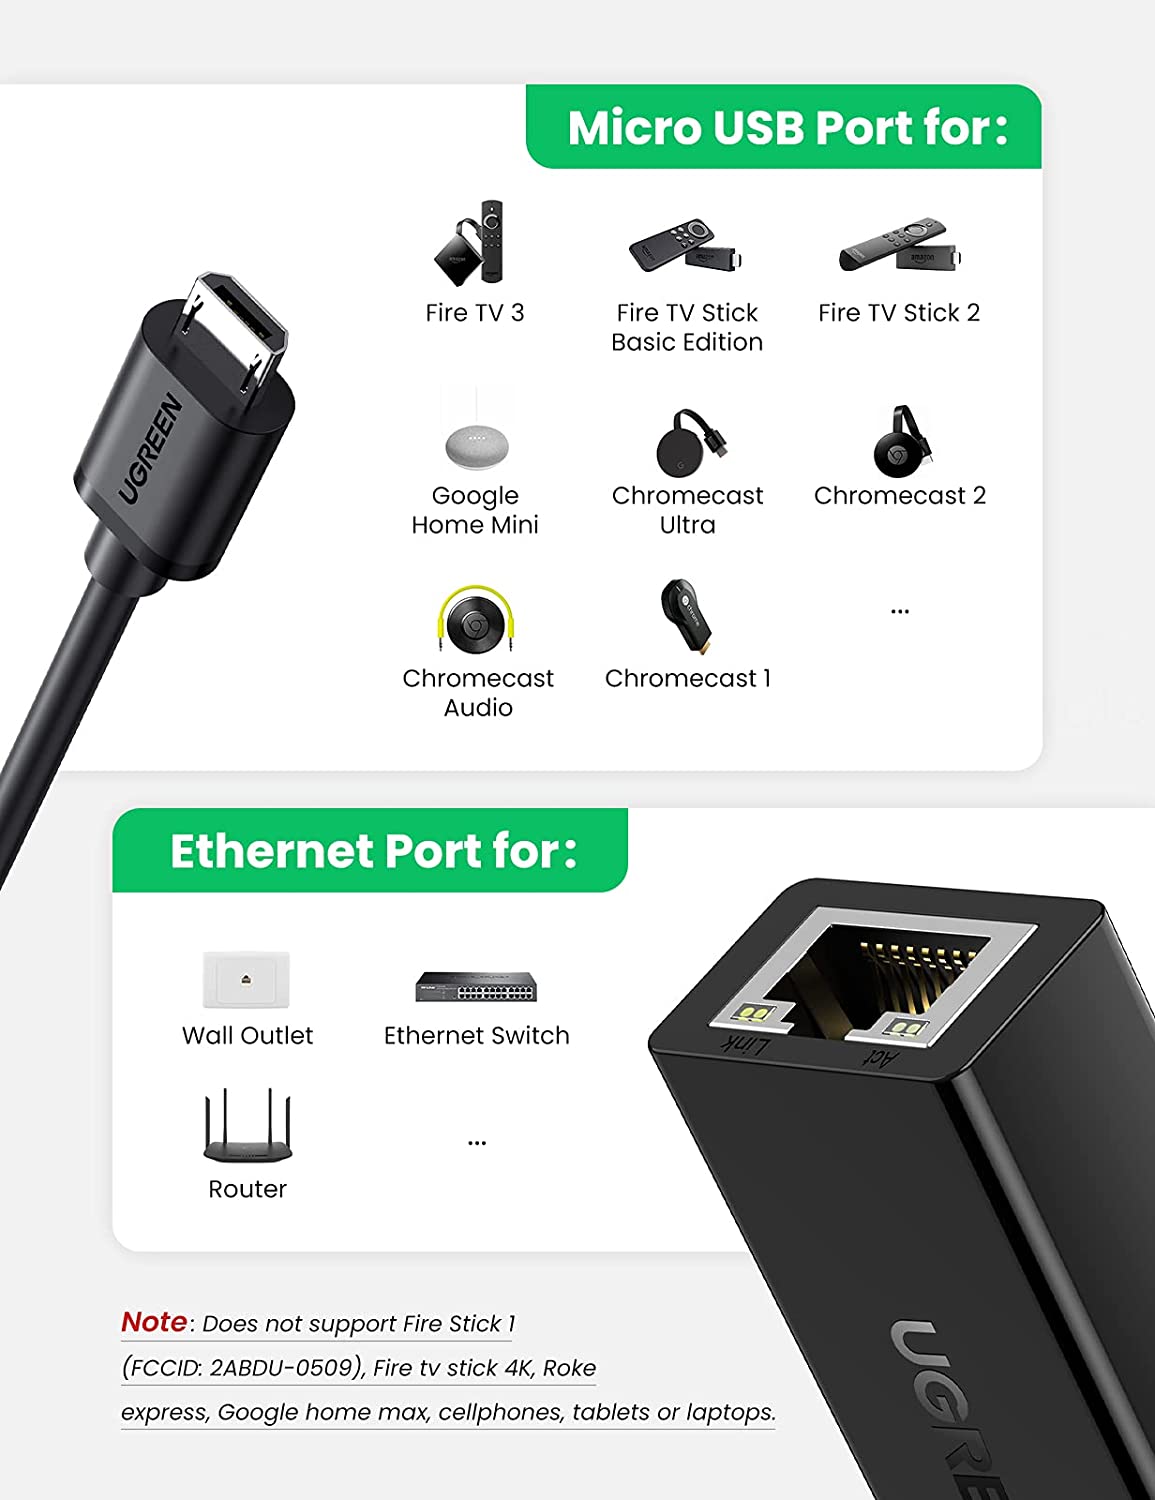  Weixinke Ethernet Adapter for Fire TV Stick (2nd GEN), All-New Fire  TV (2017), Chromecast Ultra / 2/1 / Audio, Google Home Mini, USB A to RJ45  100Mbps Network Adapter with Power